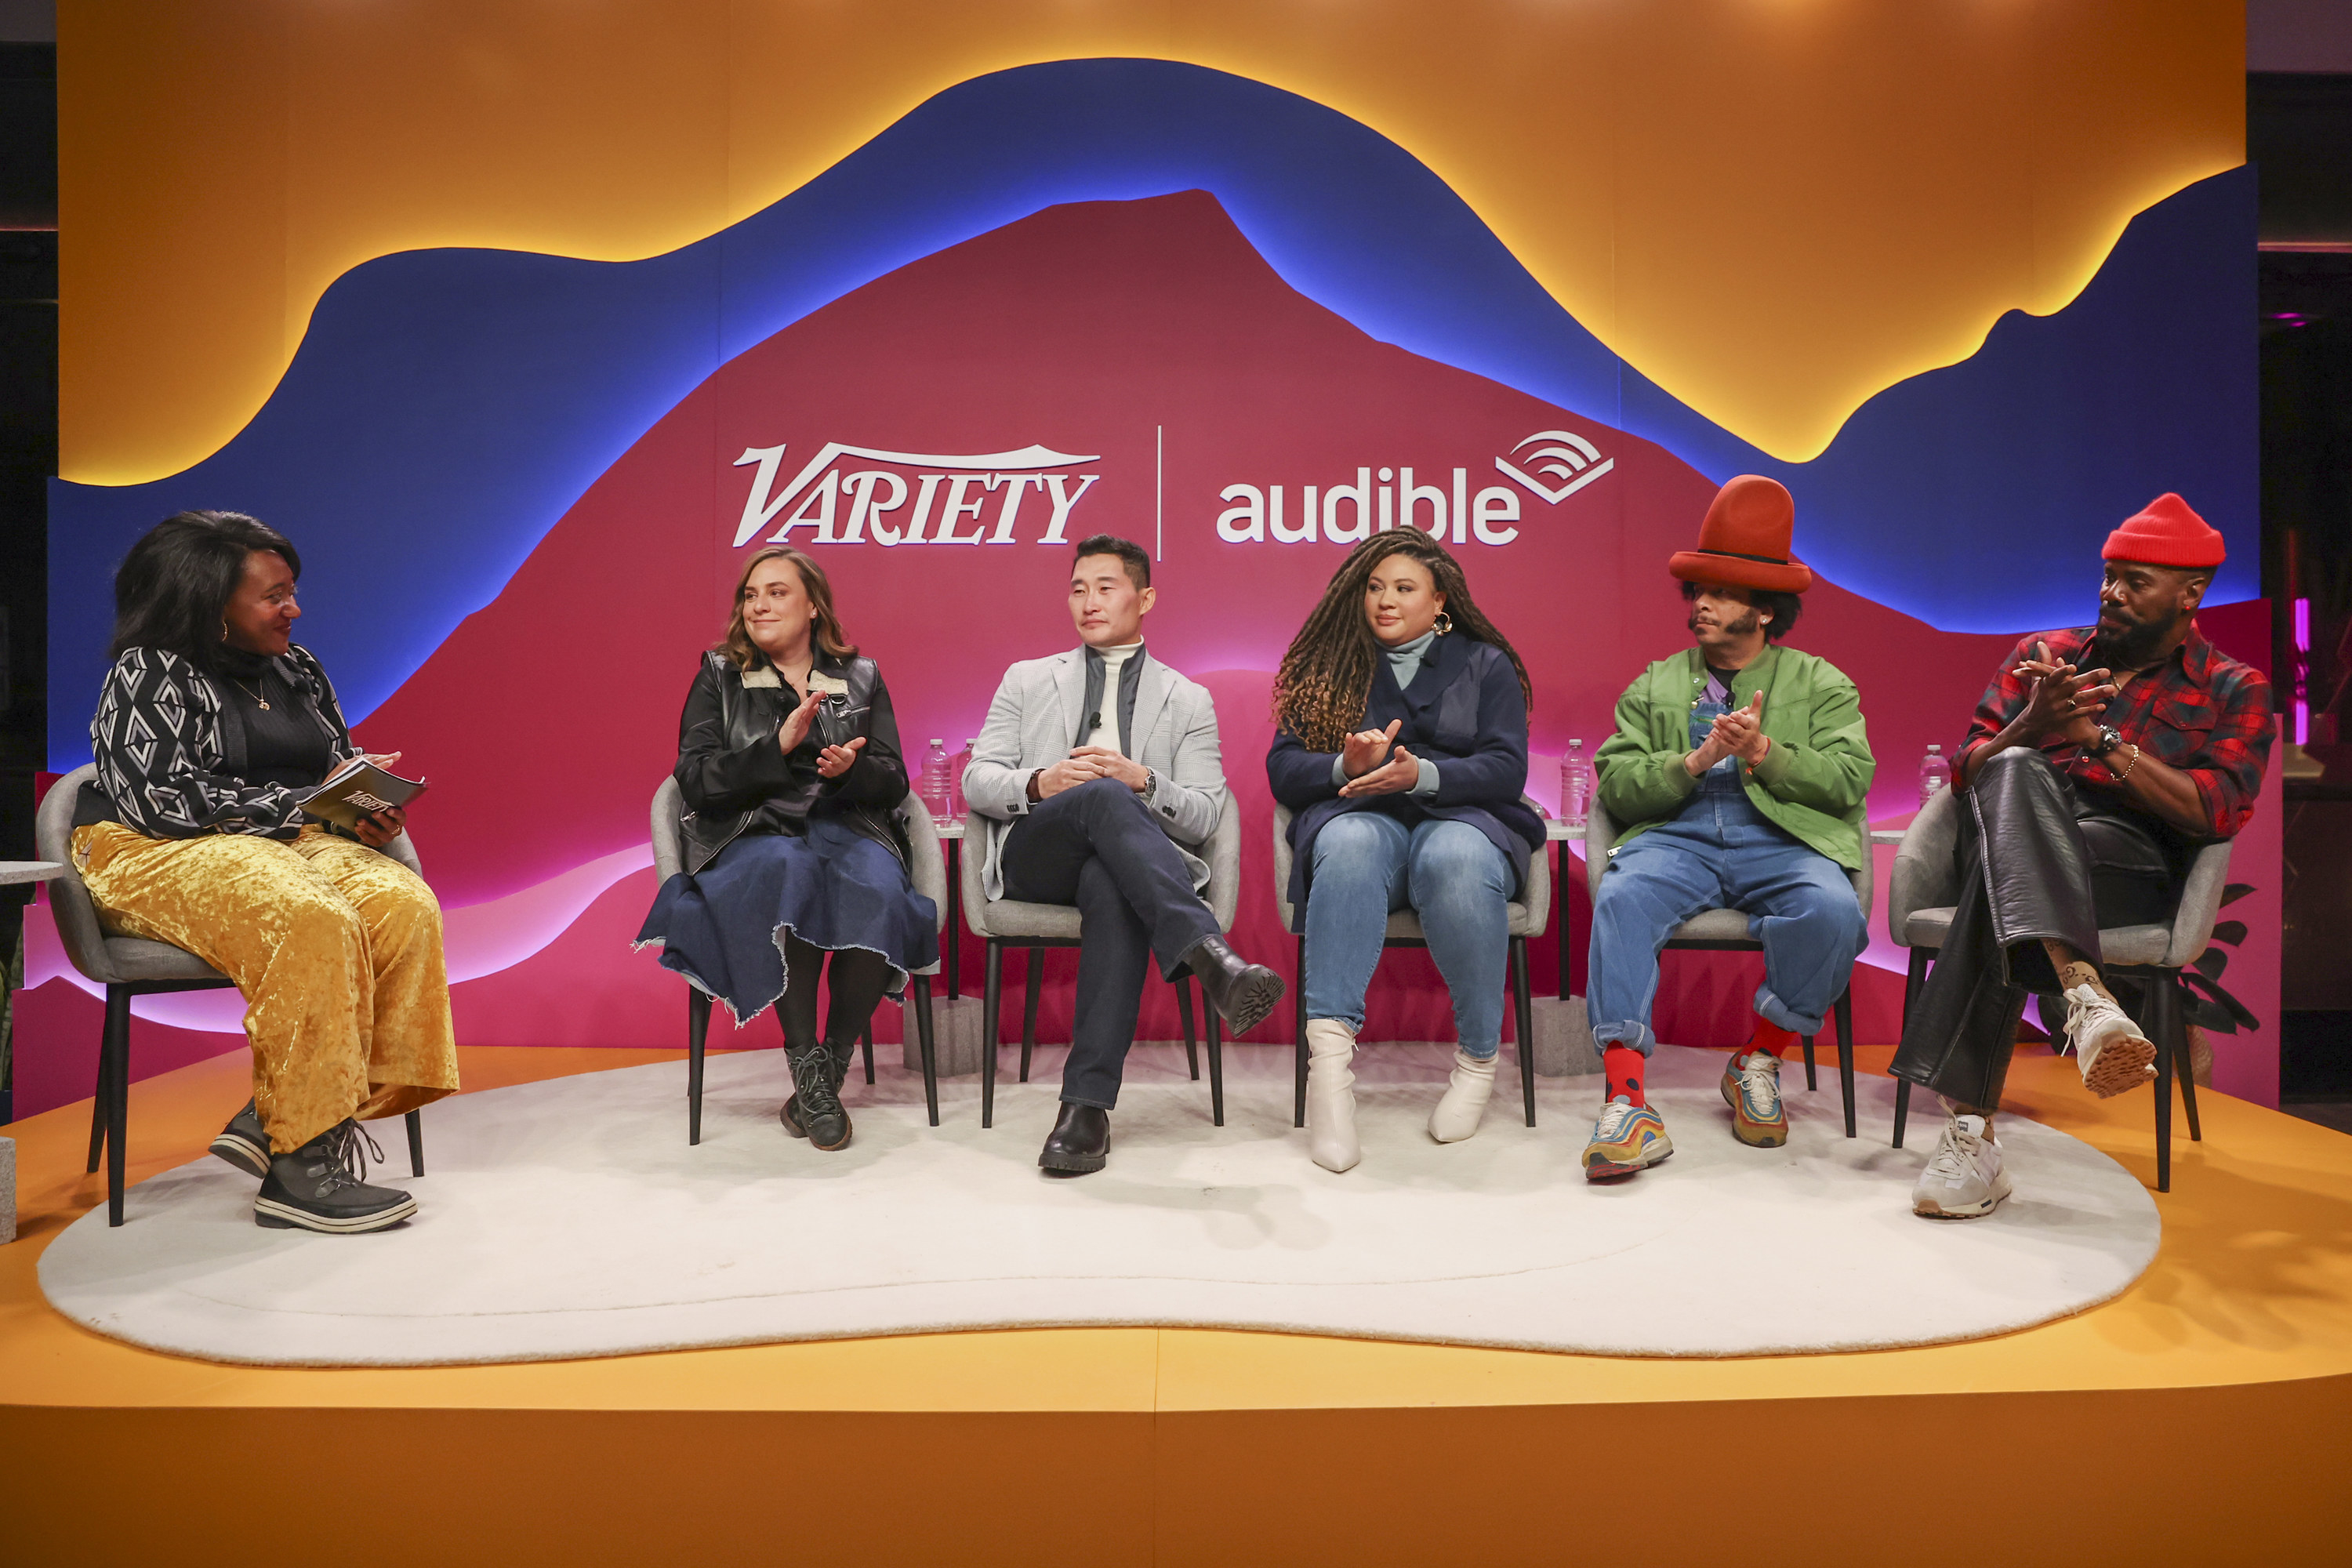 The Variety x Audible Cocktails &amp; Conversations panel